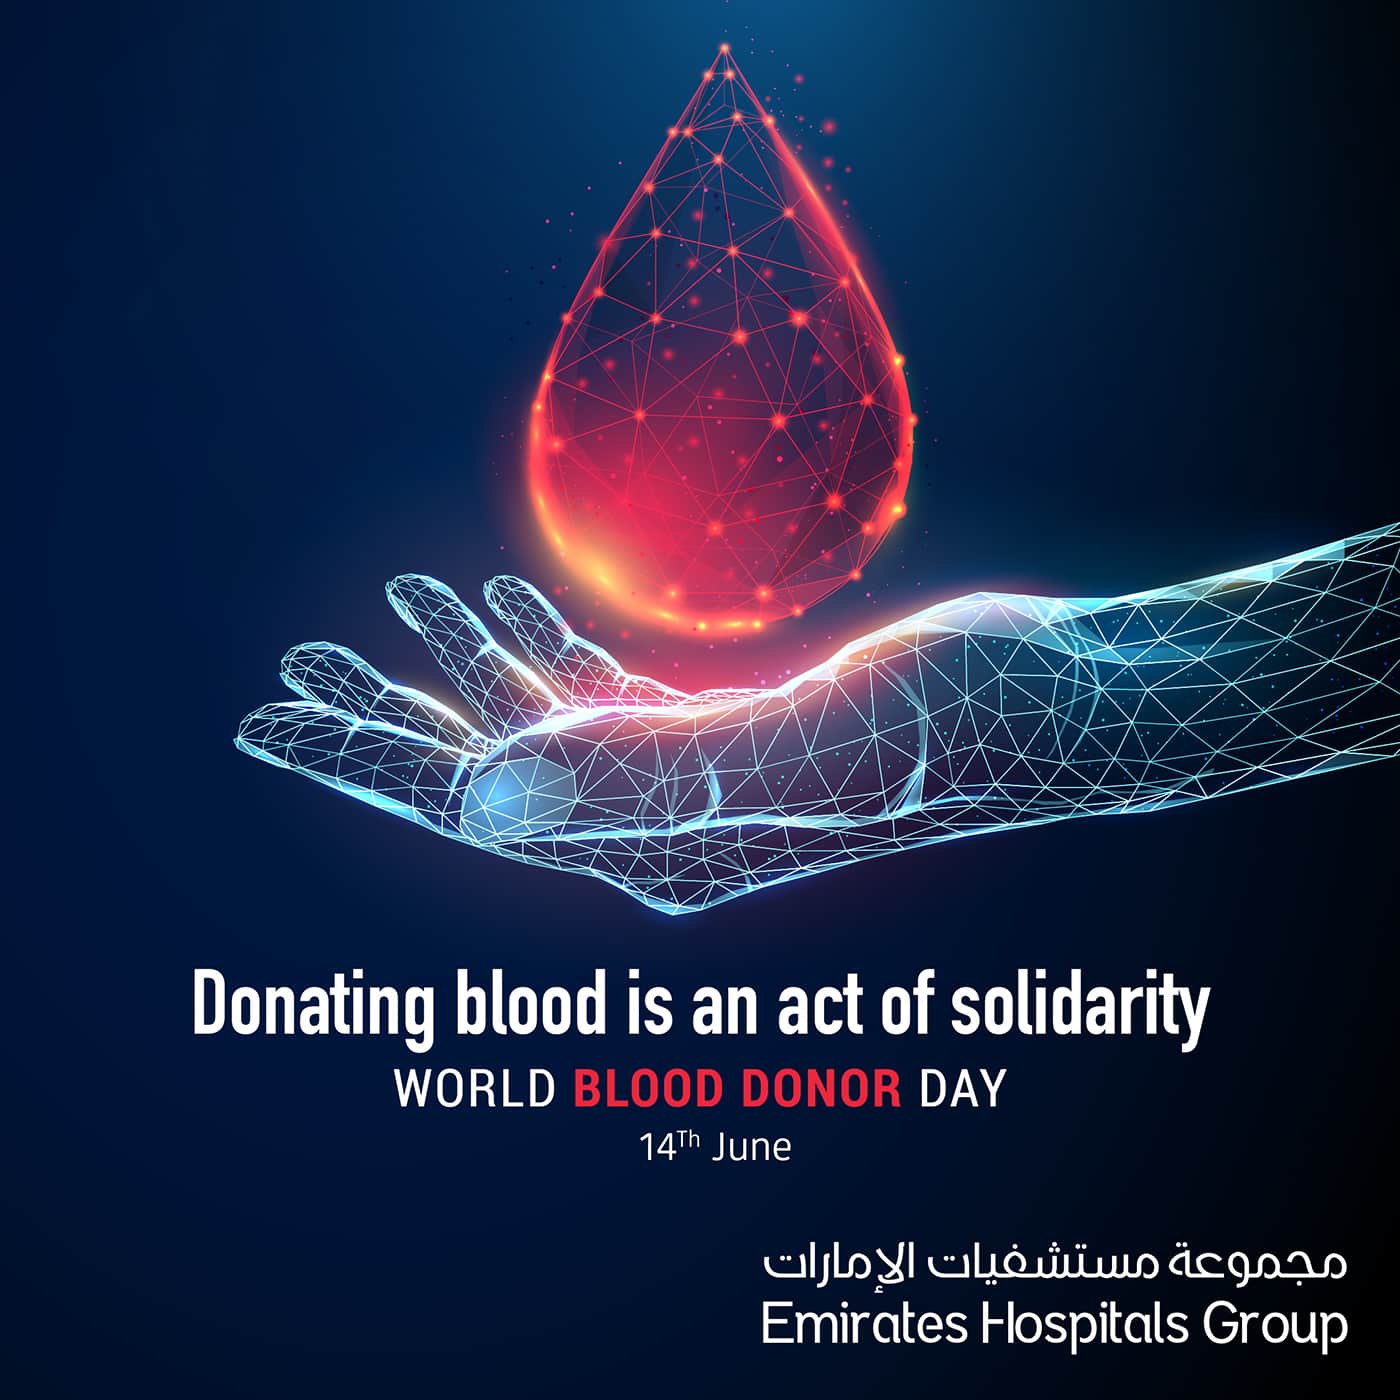 Act of Solidarity is Blood Donating World Blood Donor Day